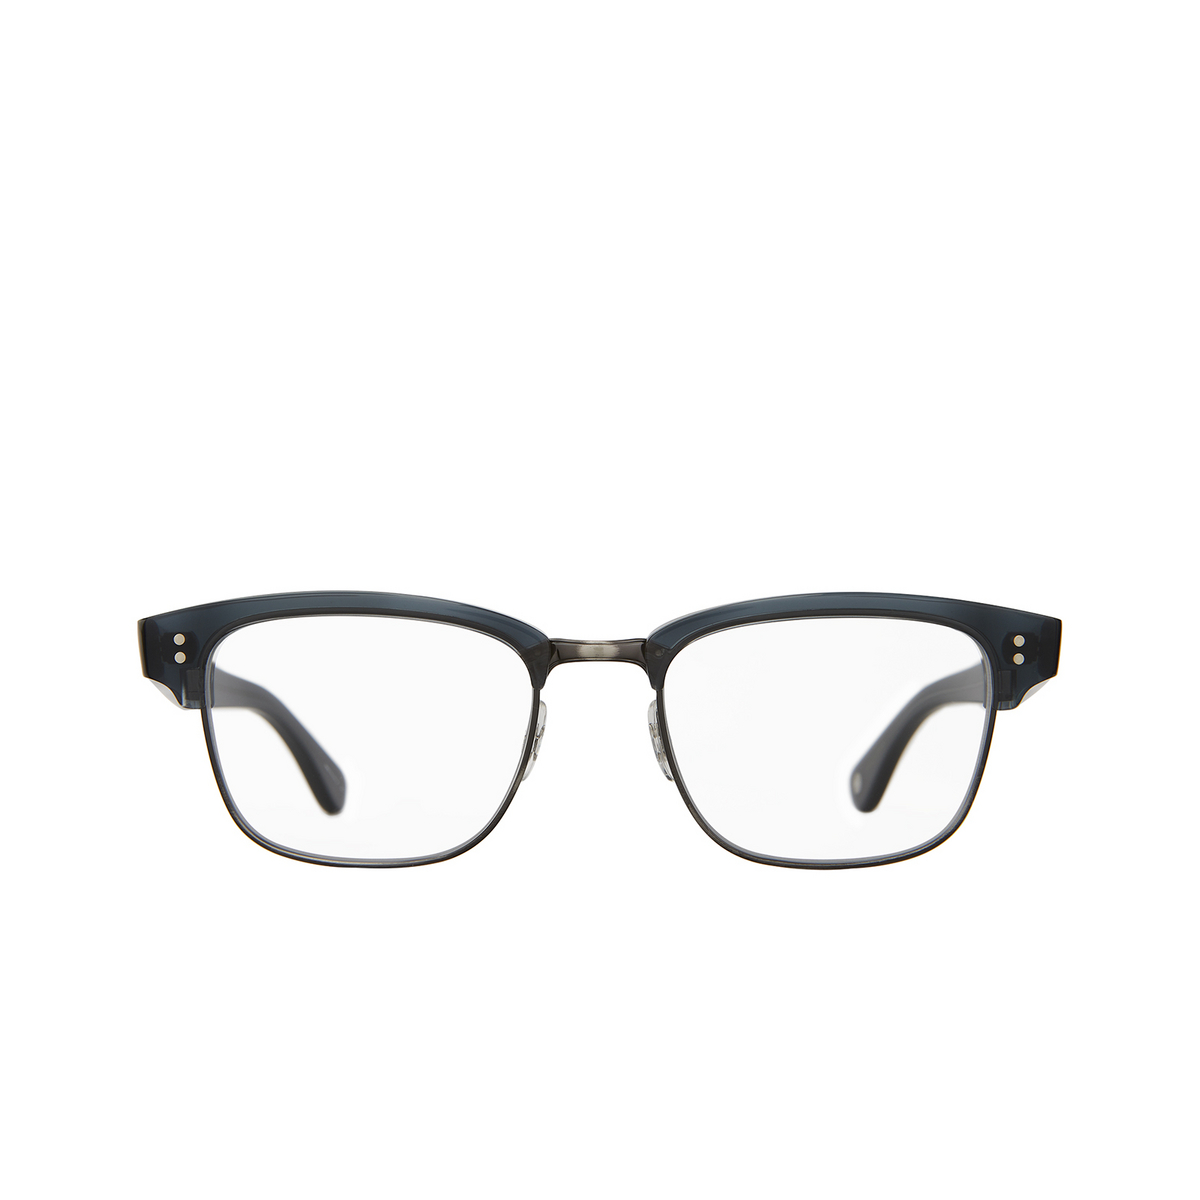 Garrett Leight® Square Eyeglasses: Gibson color Navy - Pewter Nvy-pw - front view.